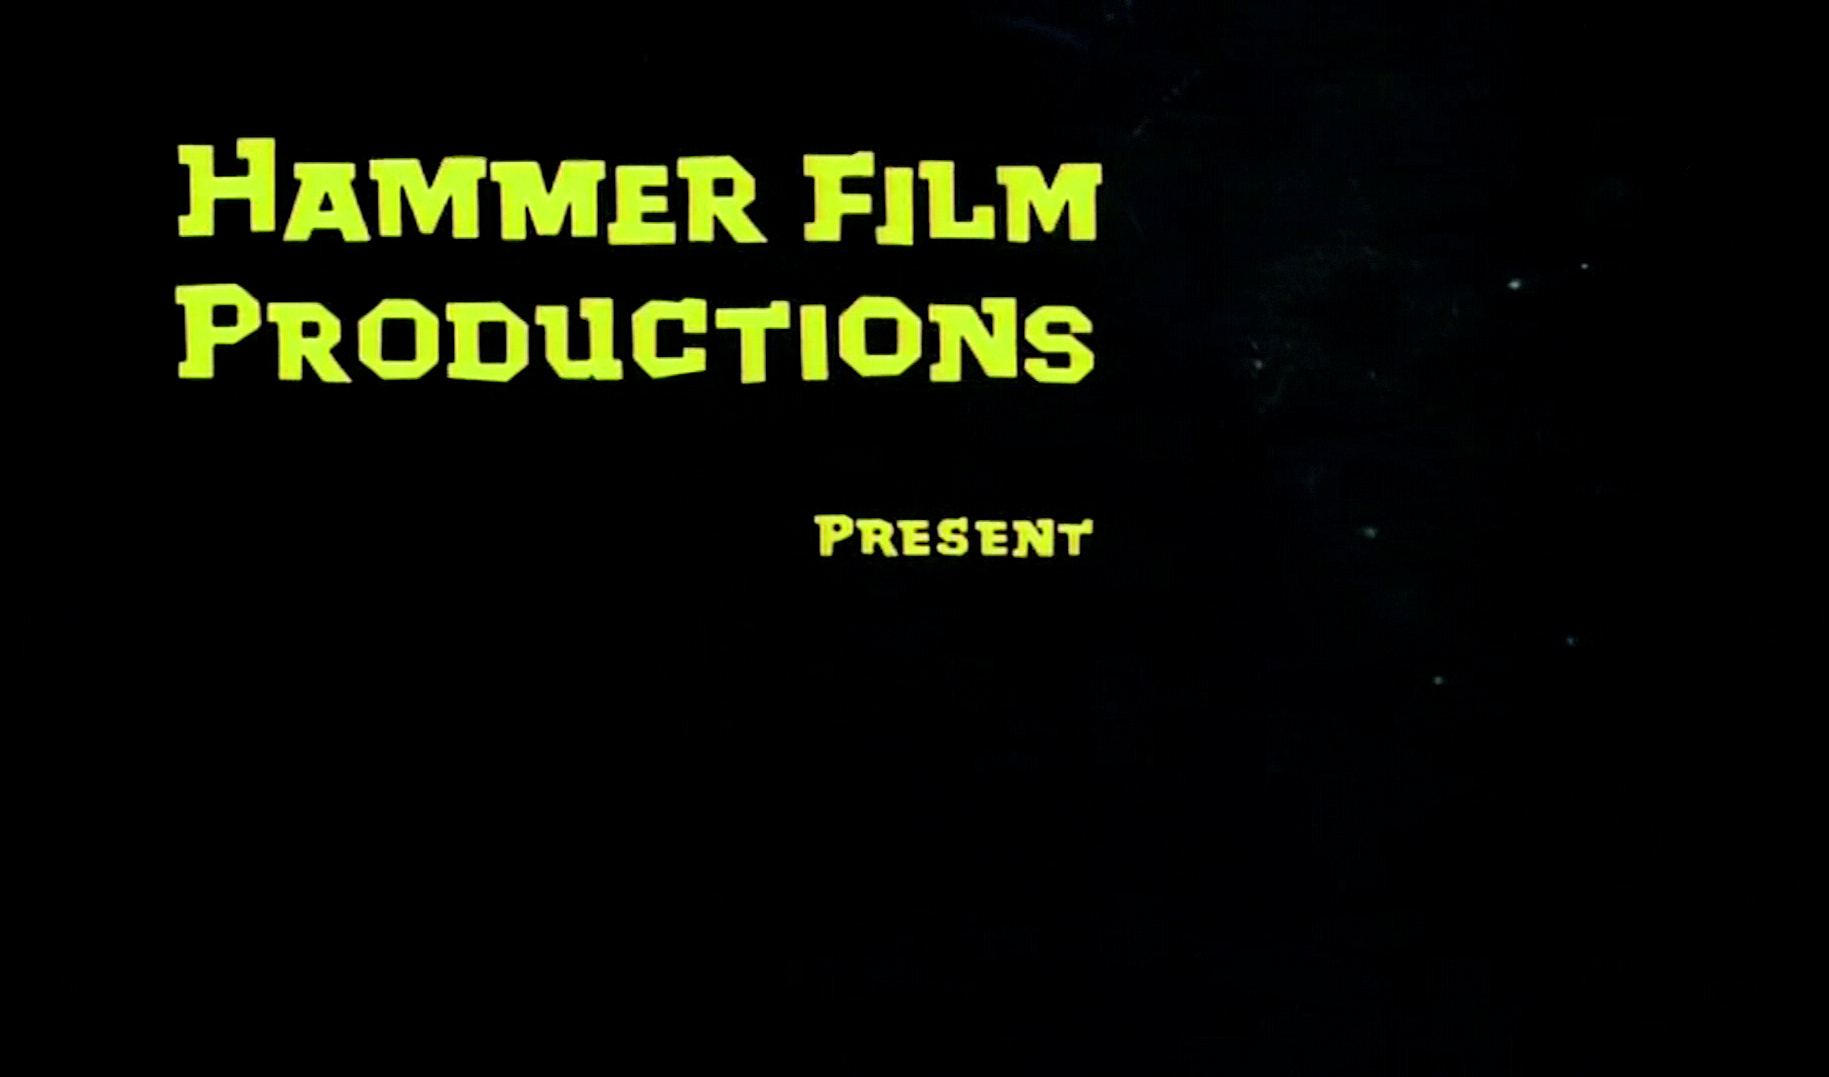 Main title from The Man Who Could Cheat Death (1959) (3). Hammer Film Productions present